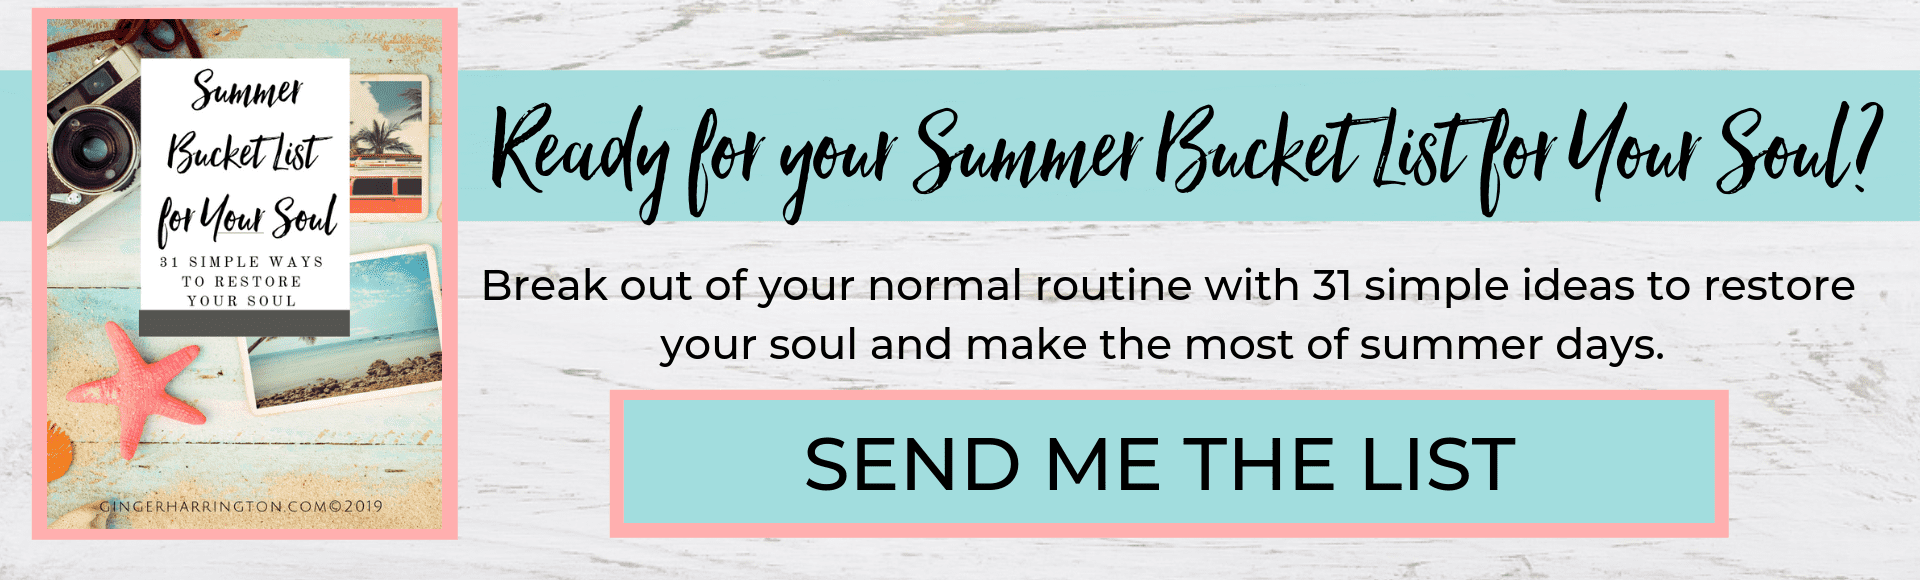 Get a summer bucket list for your soul, with 31 soul-restoring activities to make the most of this summer.